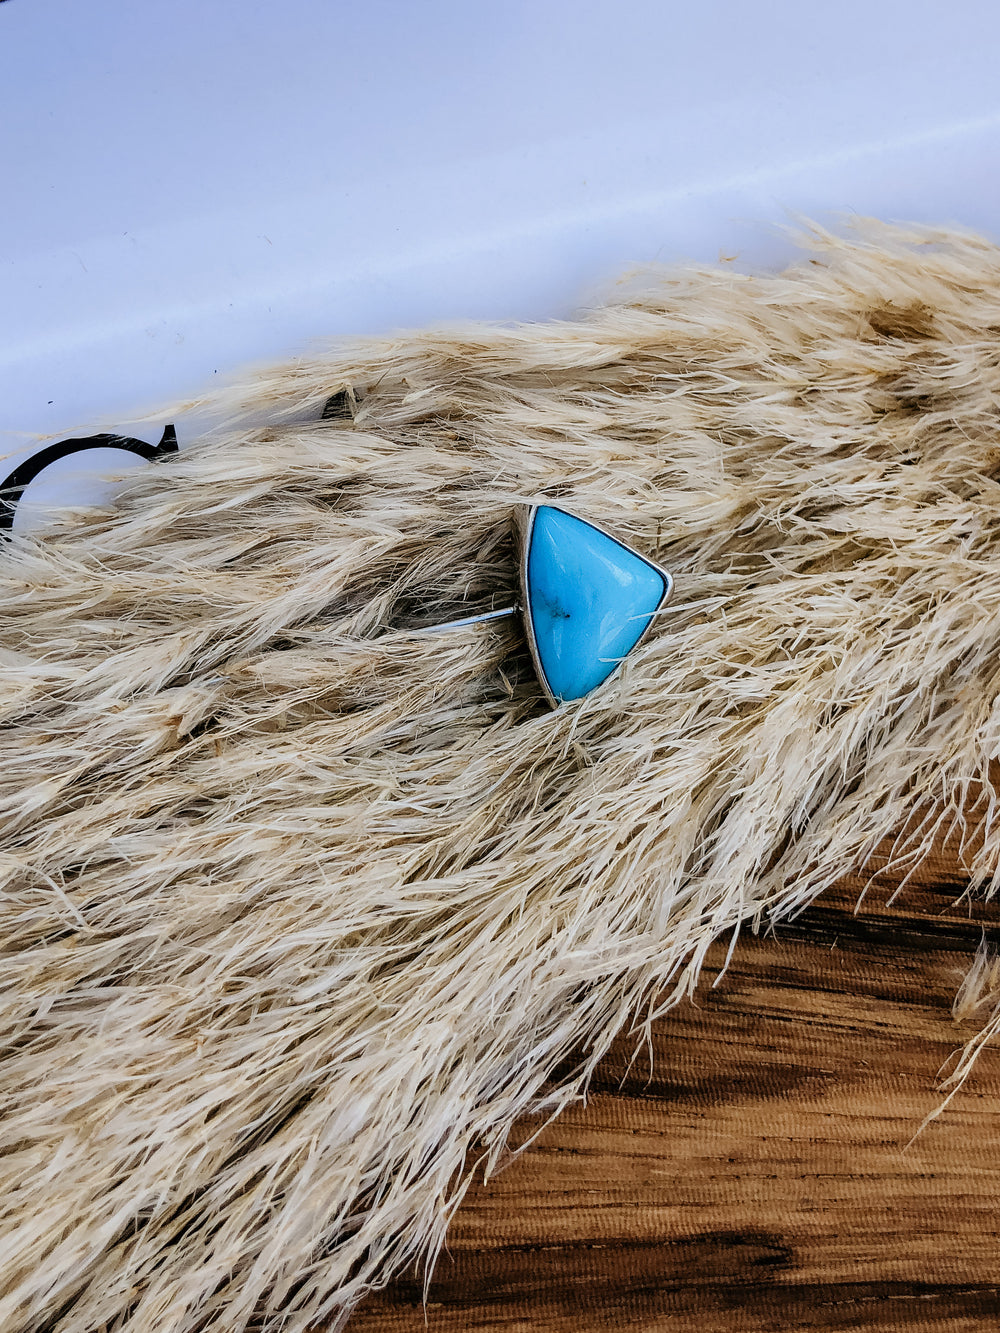 Turquoise Triangle Stick Hatpin